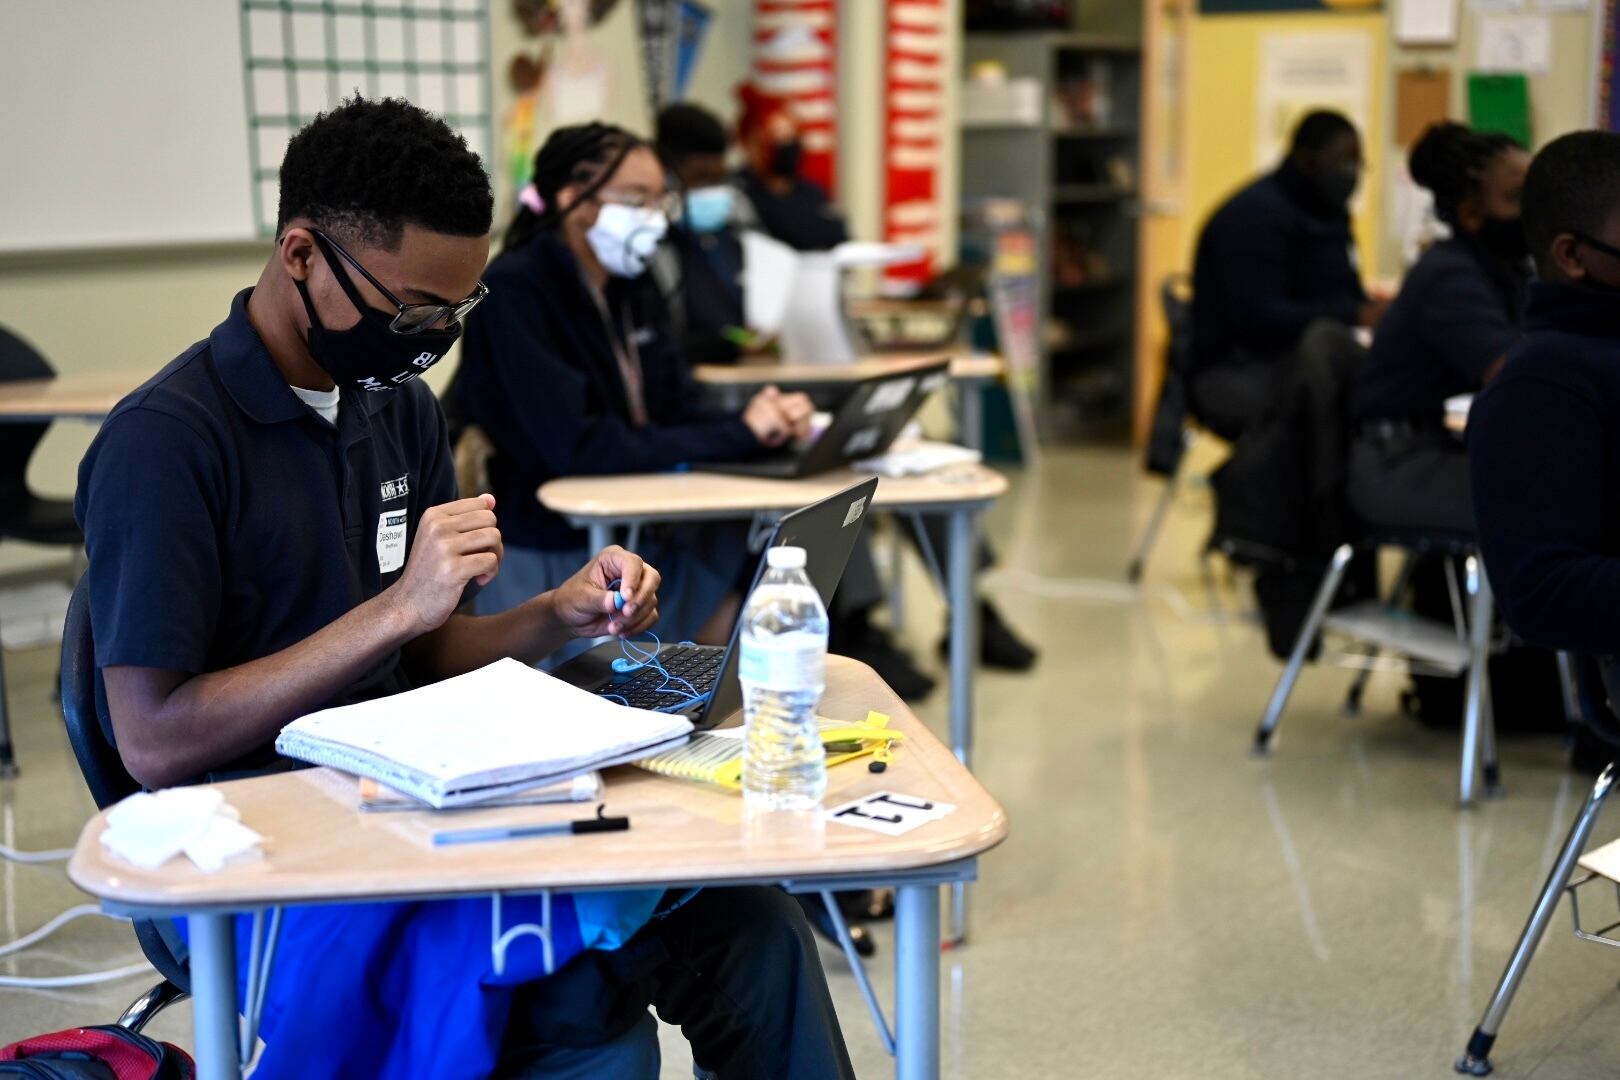 A young man works at his desk, wearing glasses, a protective mask, and a blue polo shirt. Several other students work at their desks around him in a classroom.